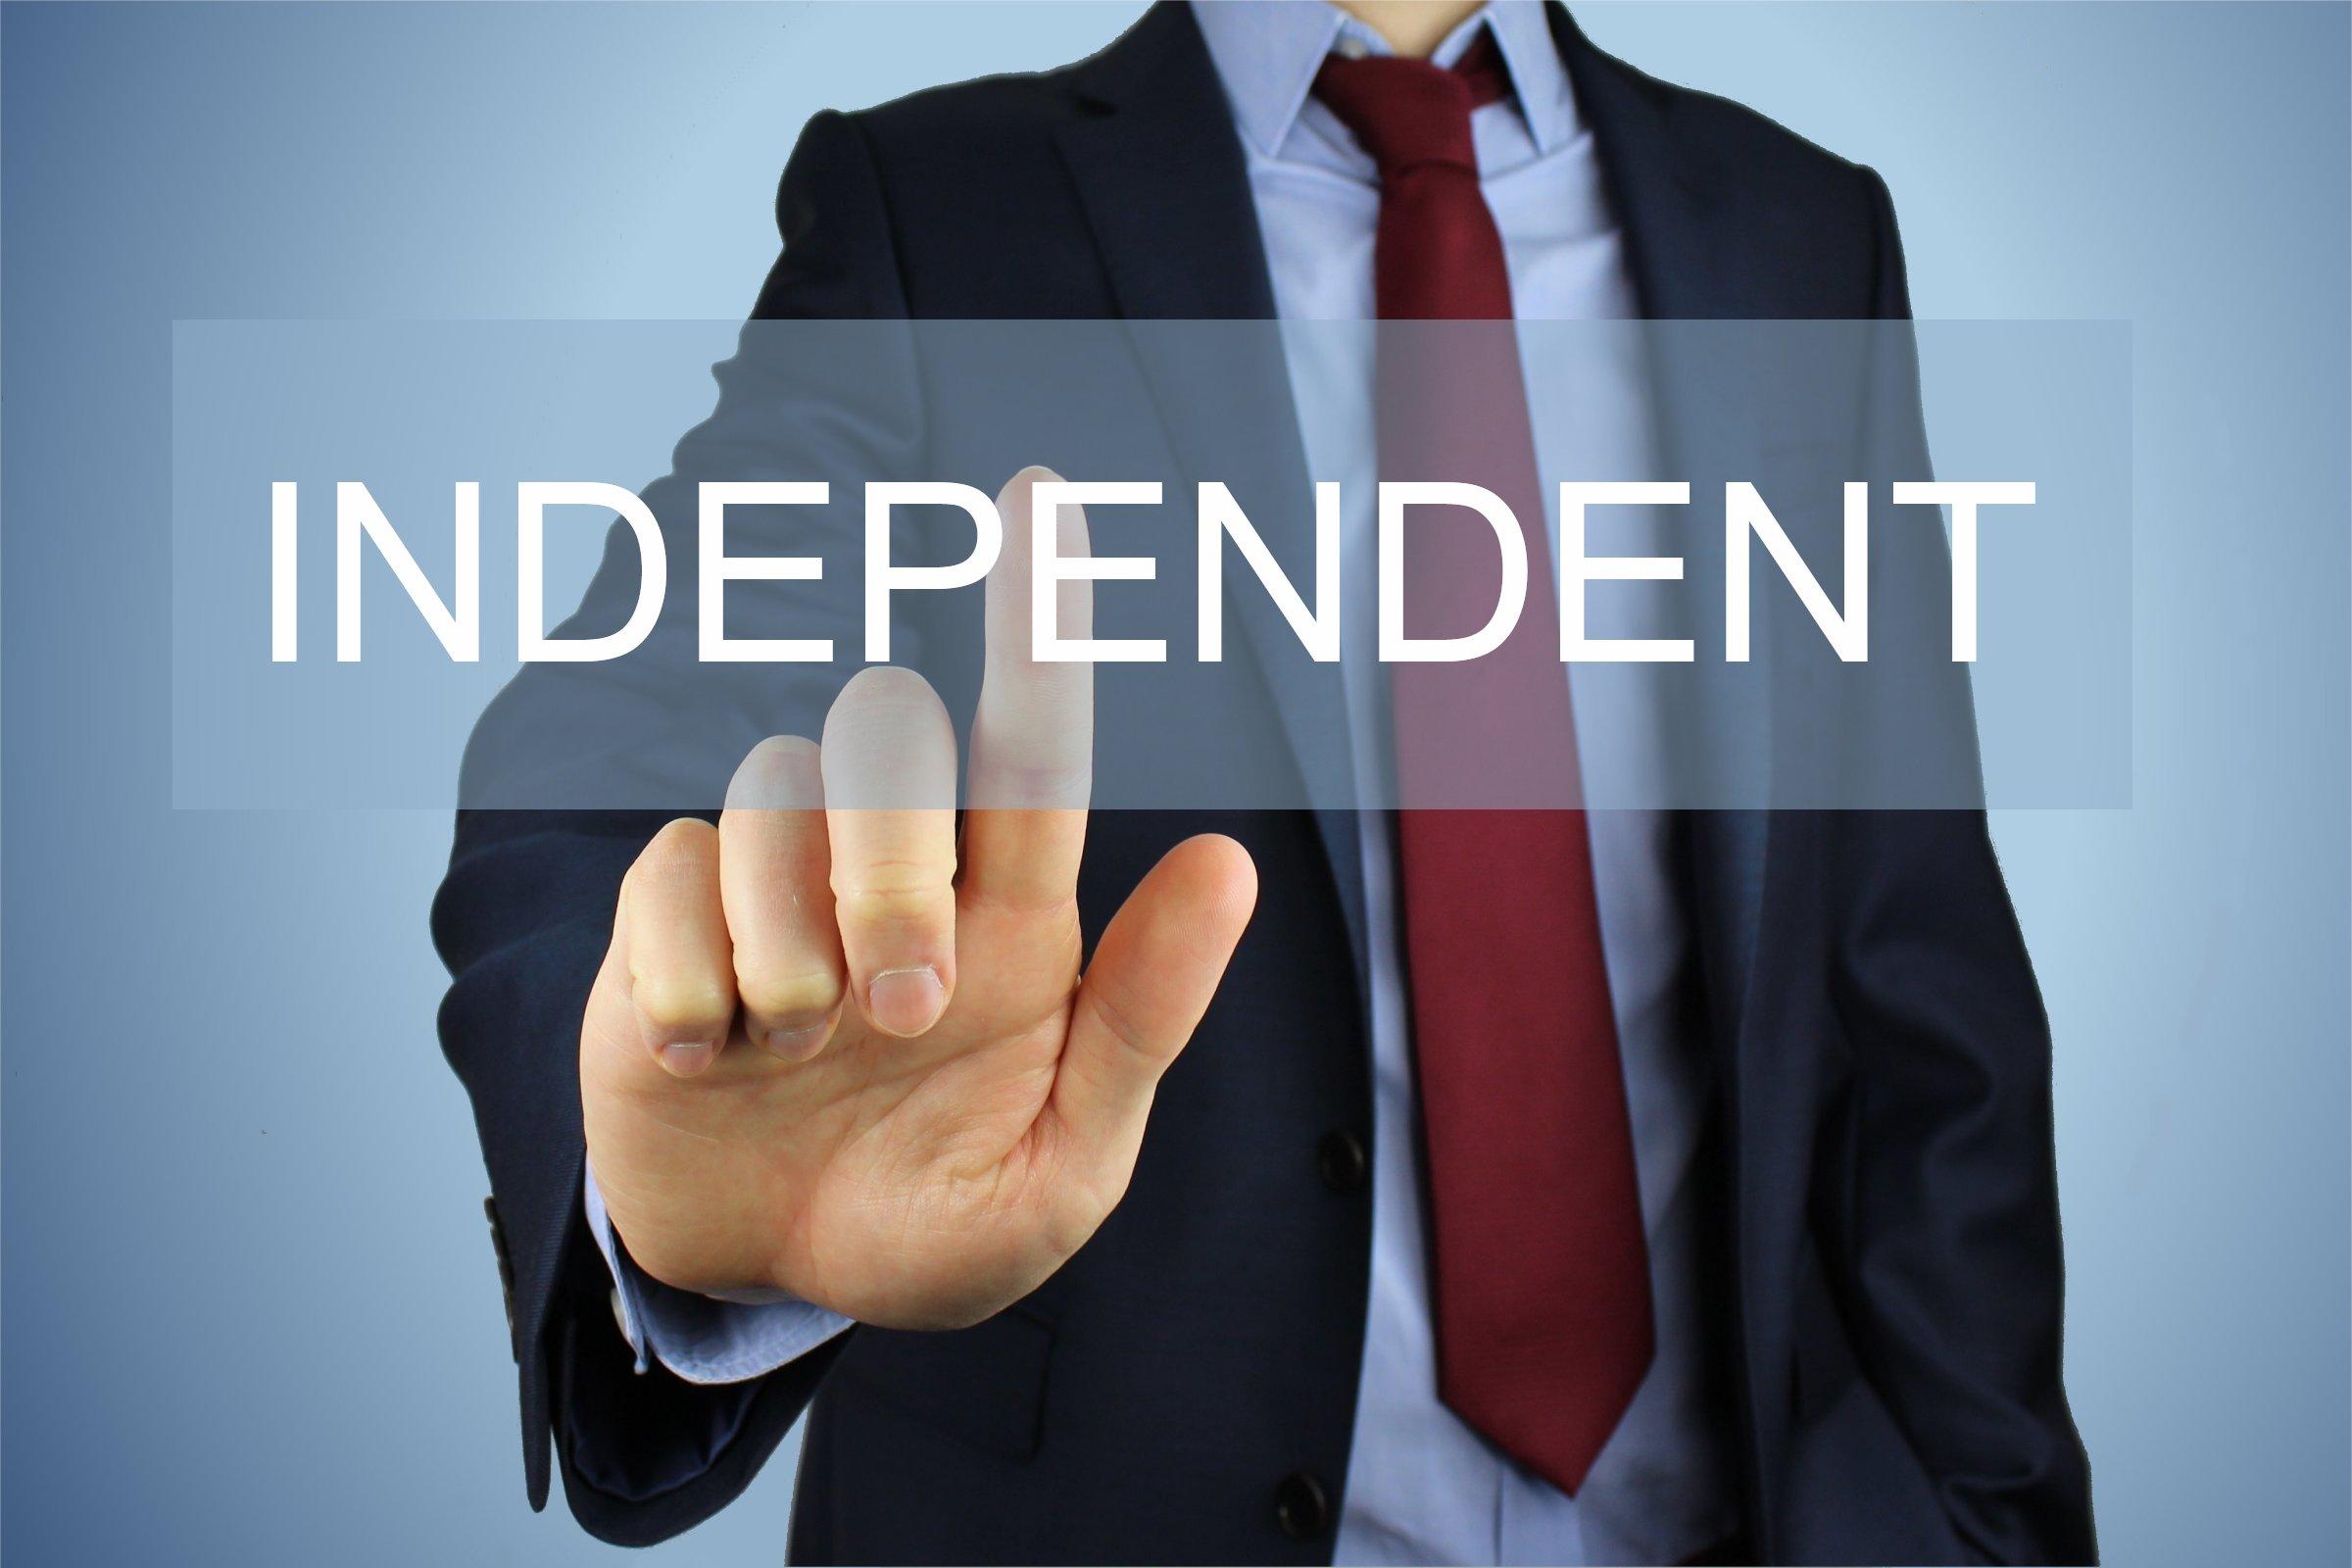 Independent CPA requirements can be a costly risk for tenants